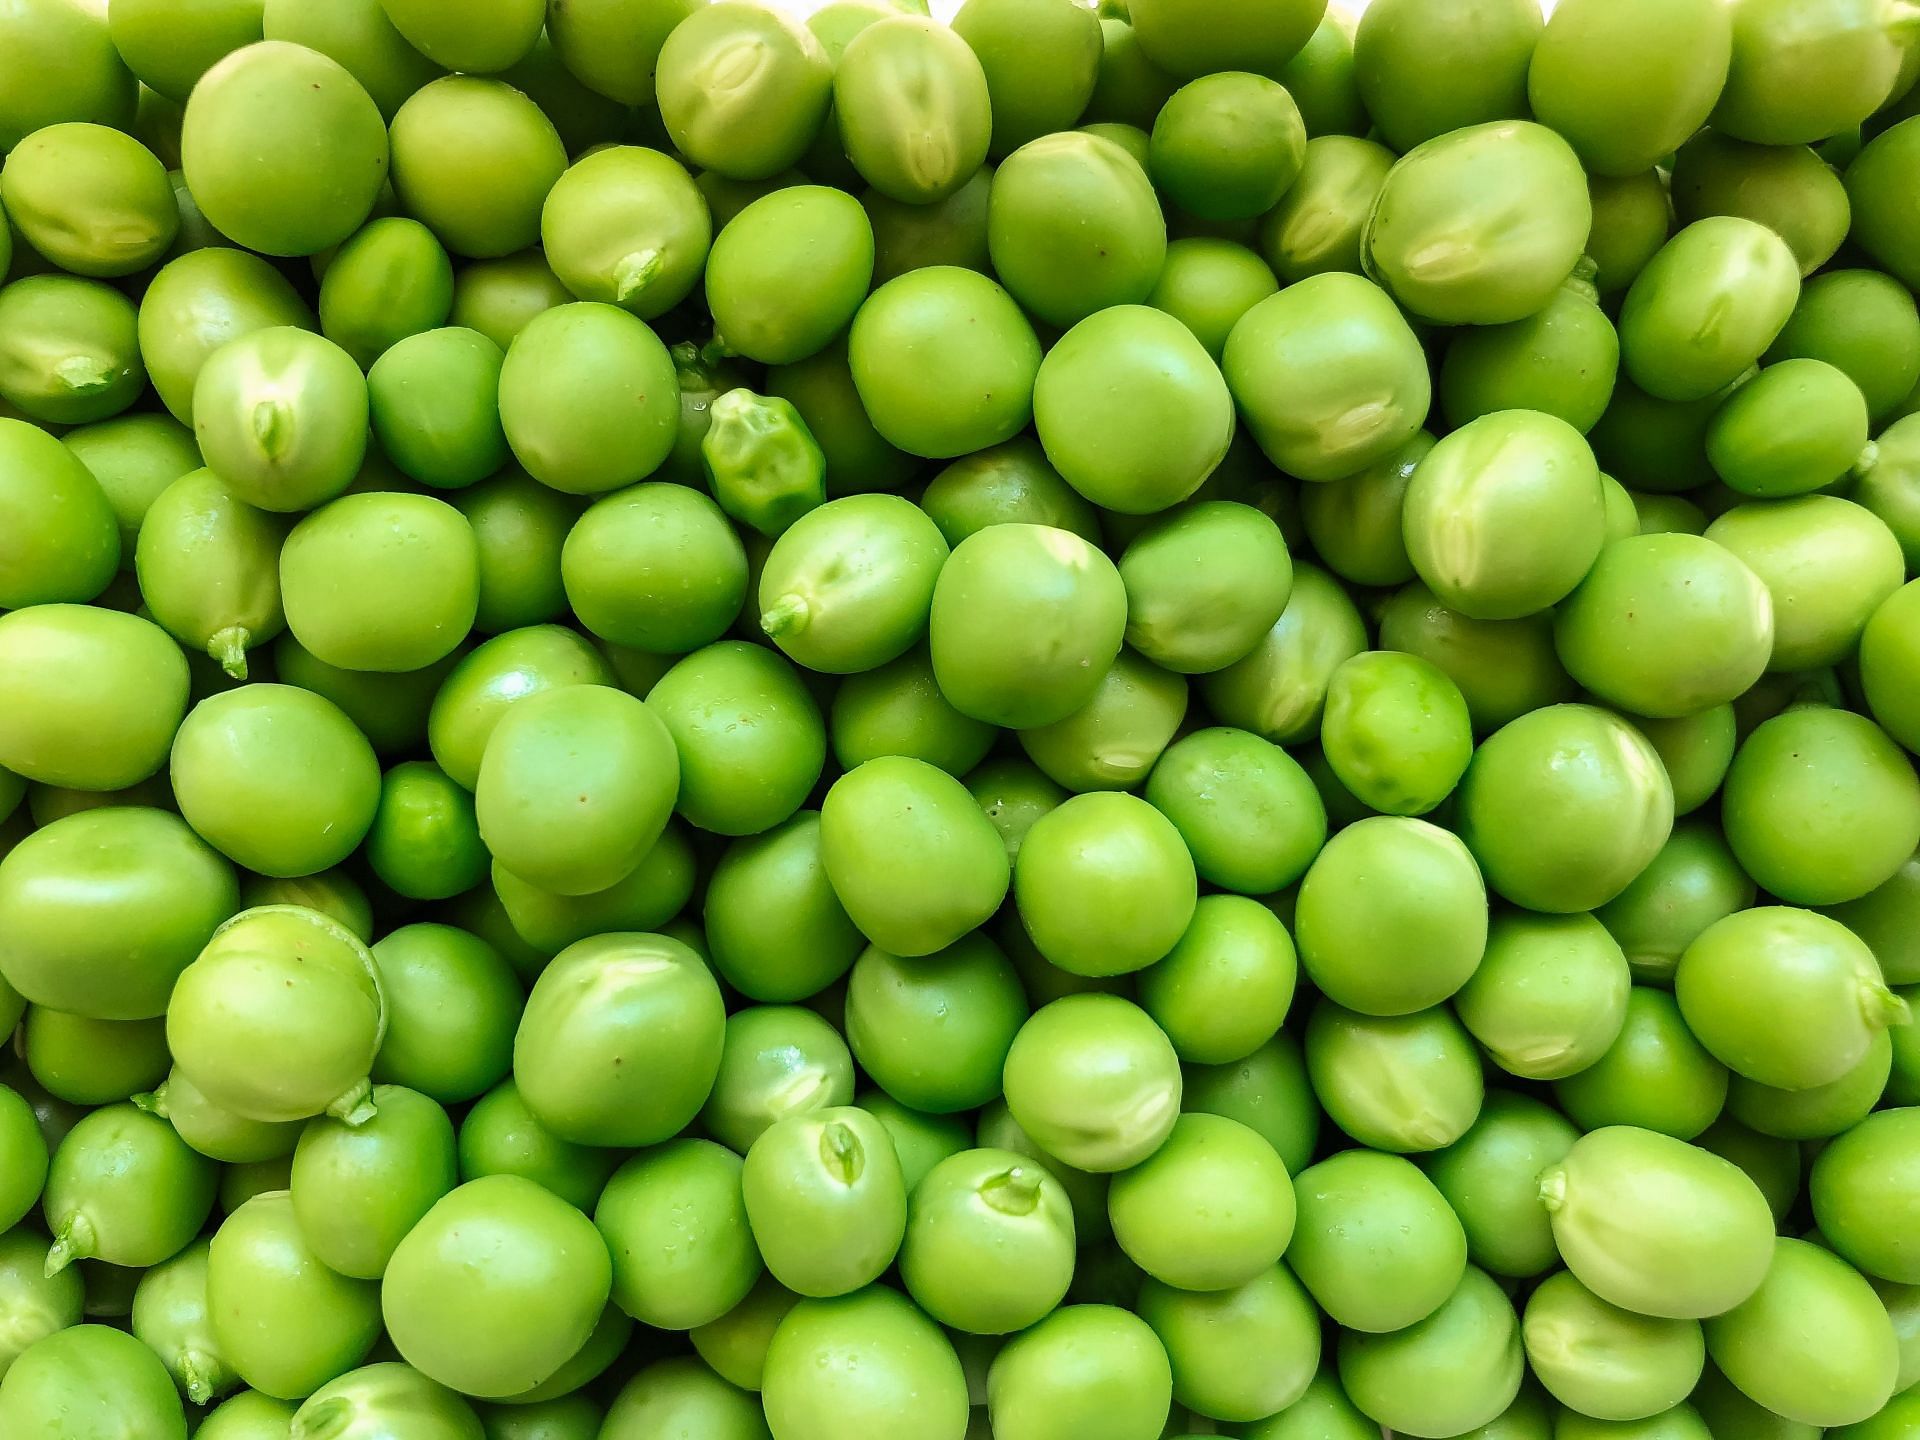 Green peas are one of the best vegetables high in iron. (Image via Unsplash/Artie Kostenko)